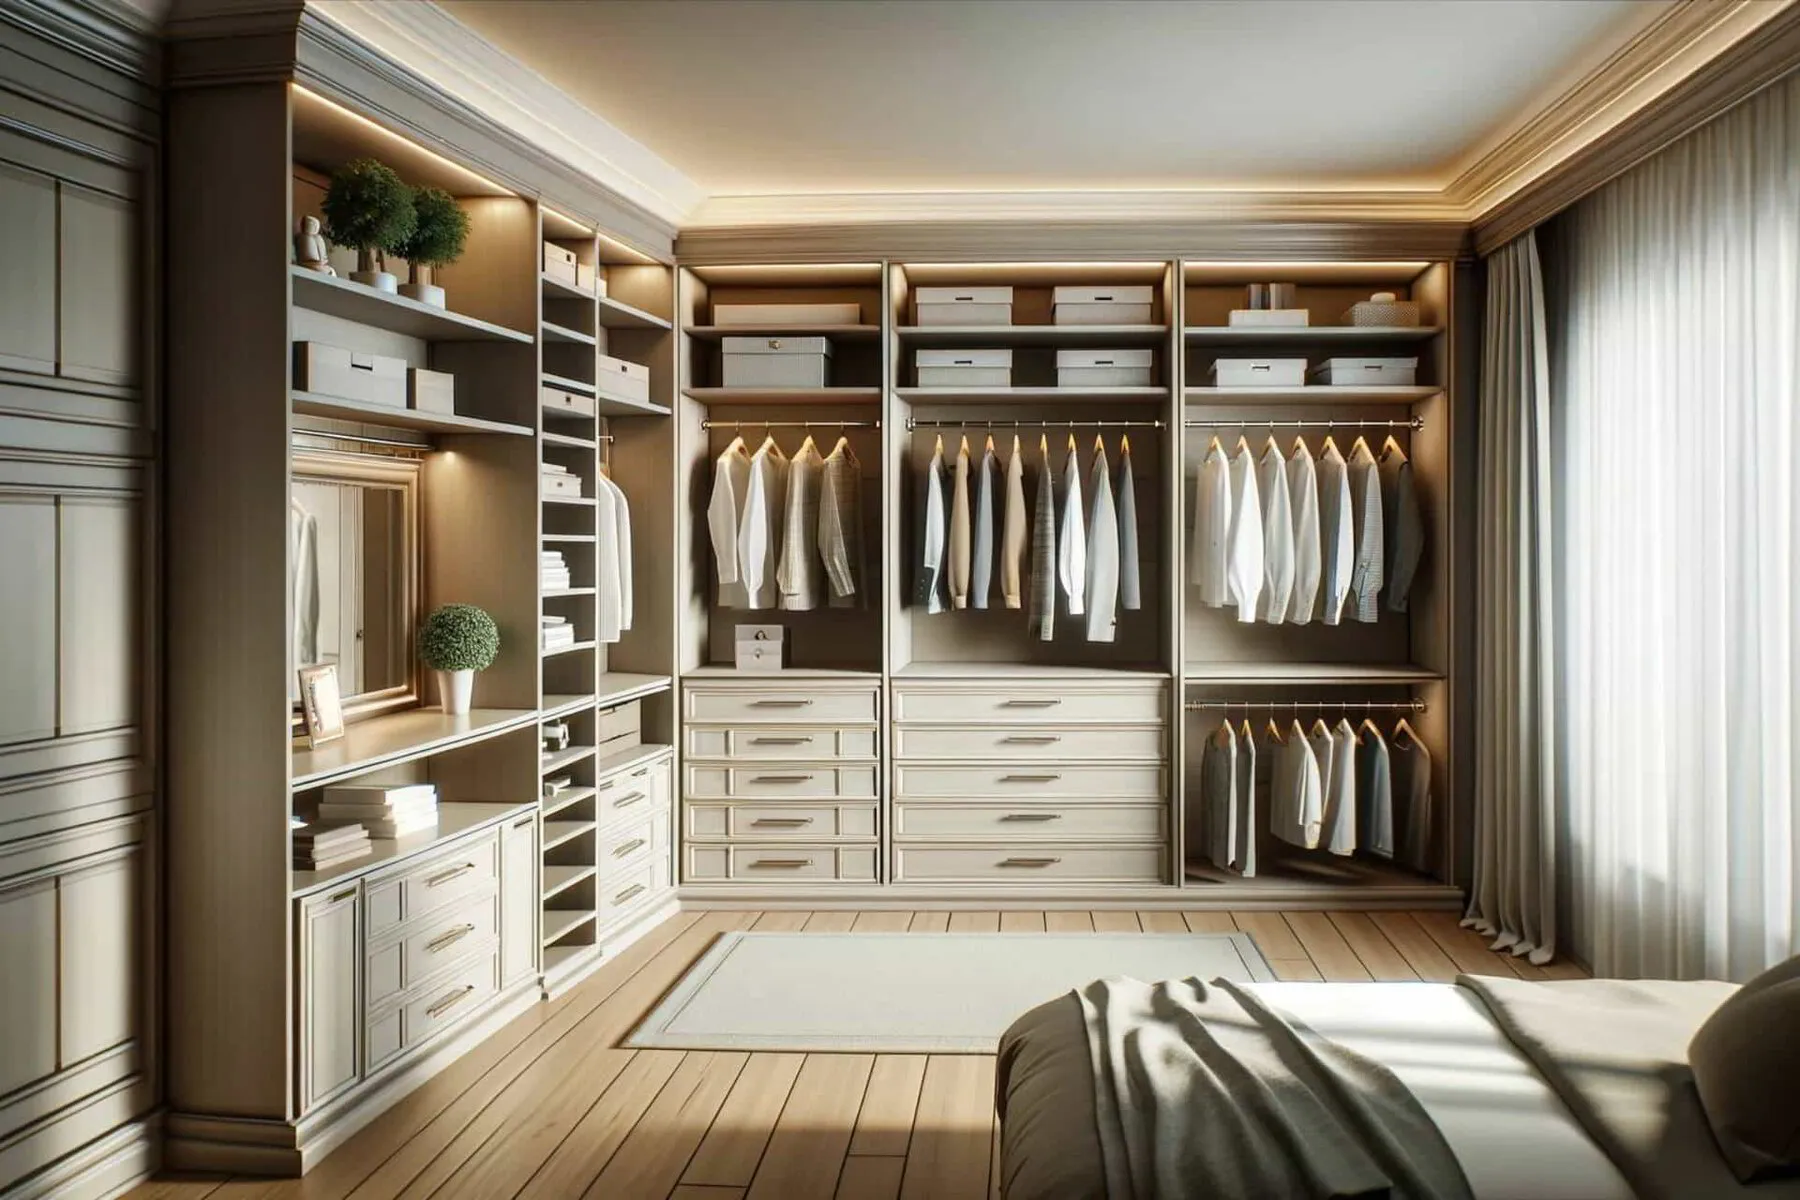 Elegant and functional custom closet solution in a home, designed to maximize storage and organization